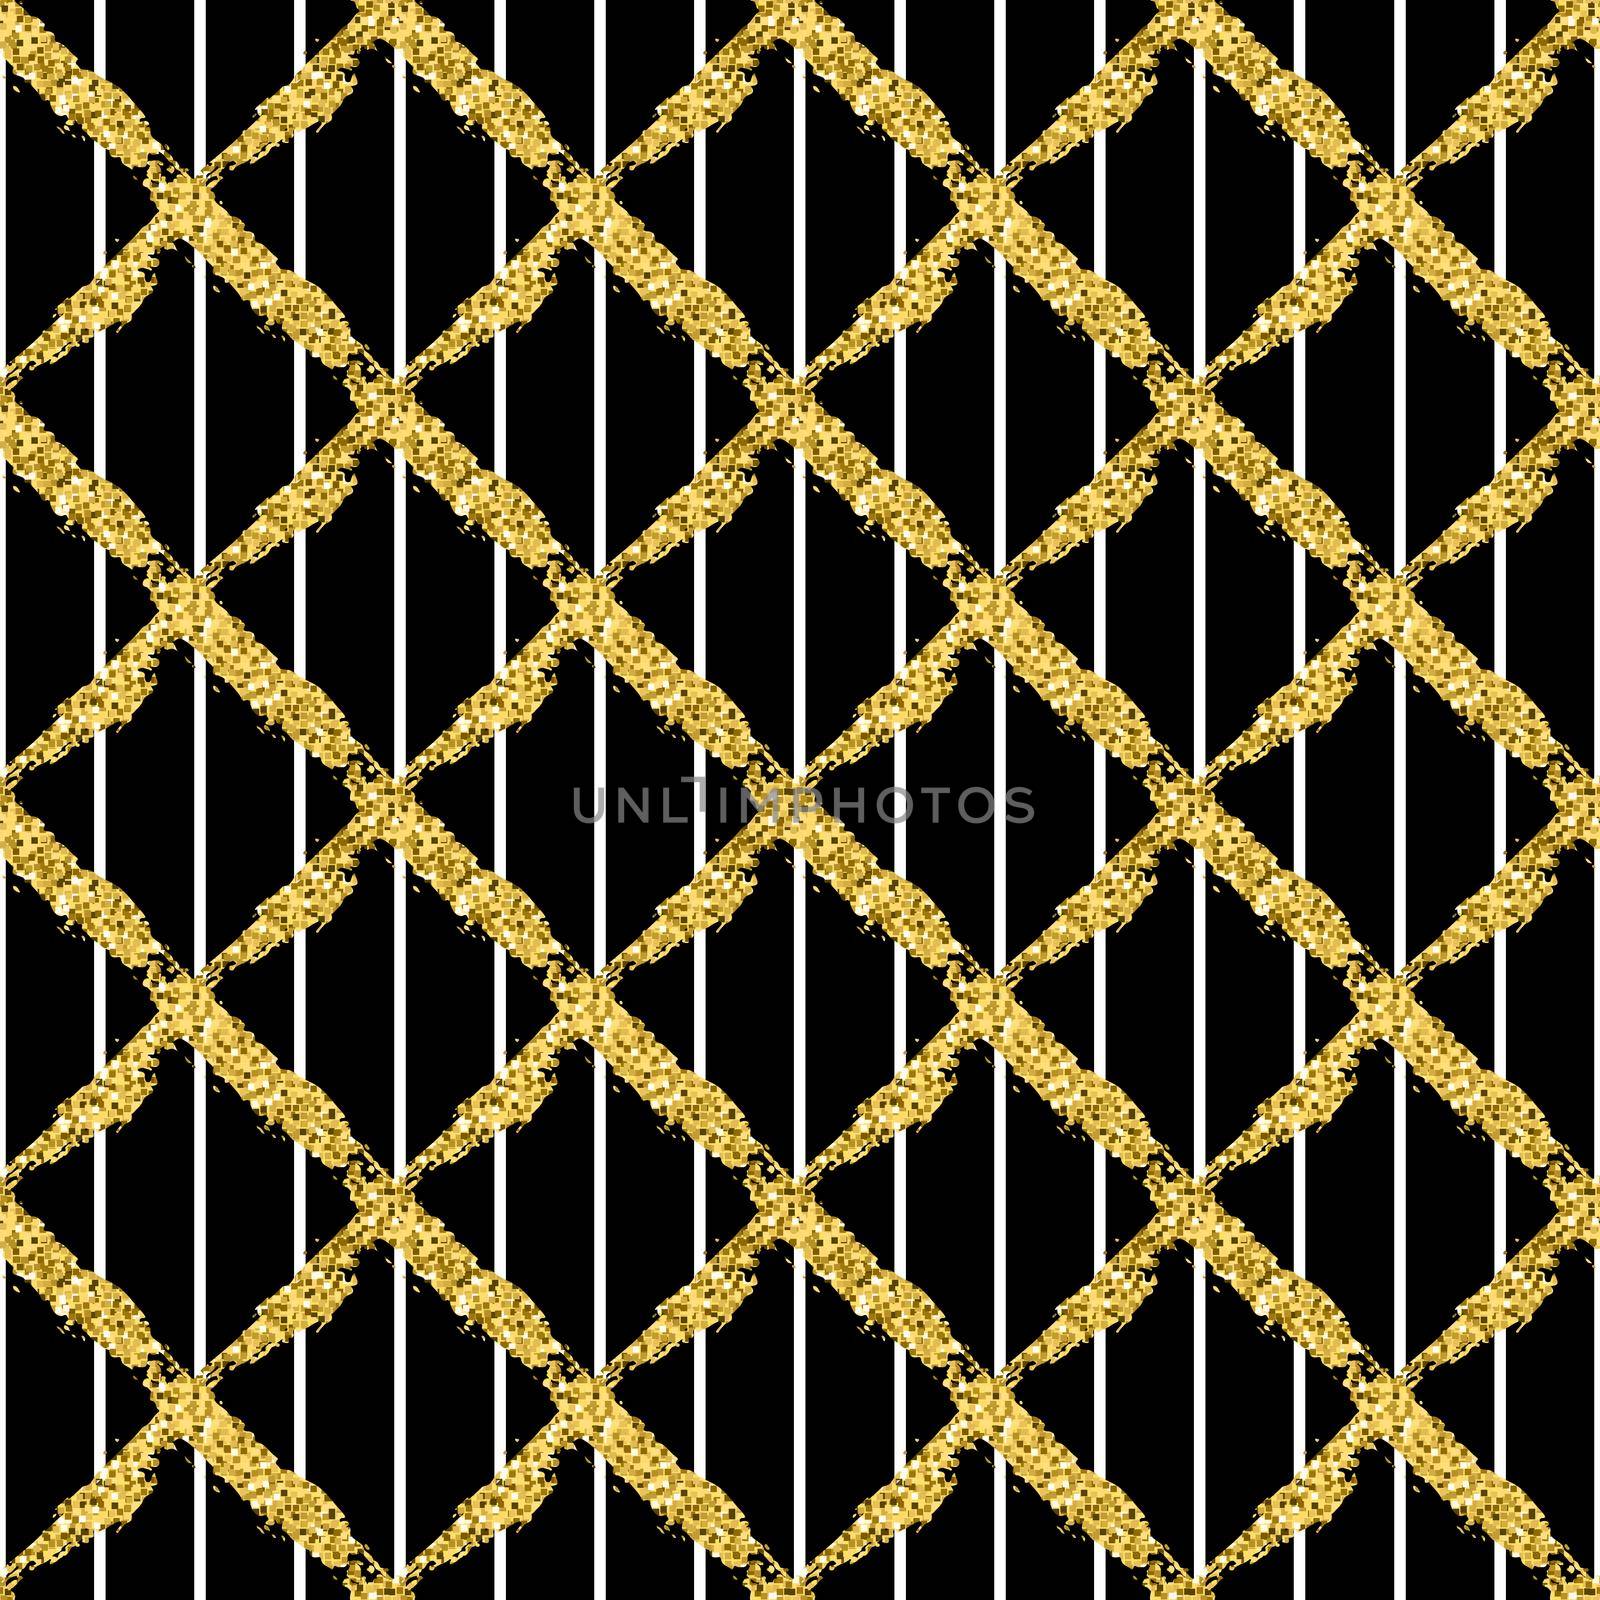 Modern seamless pattern with brush stripes plaid and cross. White, gold metallic color on black background. Golden glitter texture. Ink geometric elements. Fashion catwalk style. Repeat fabric cloth.